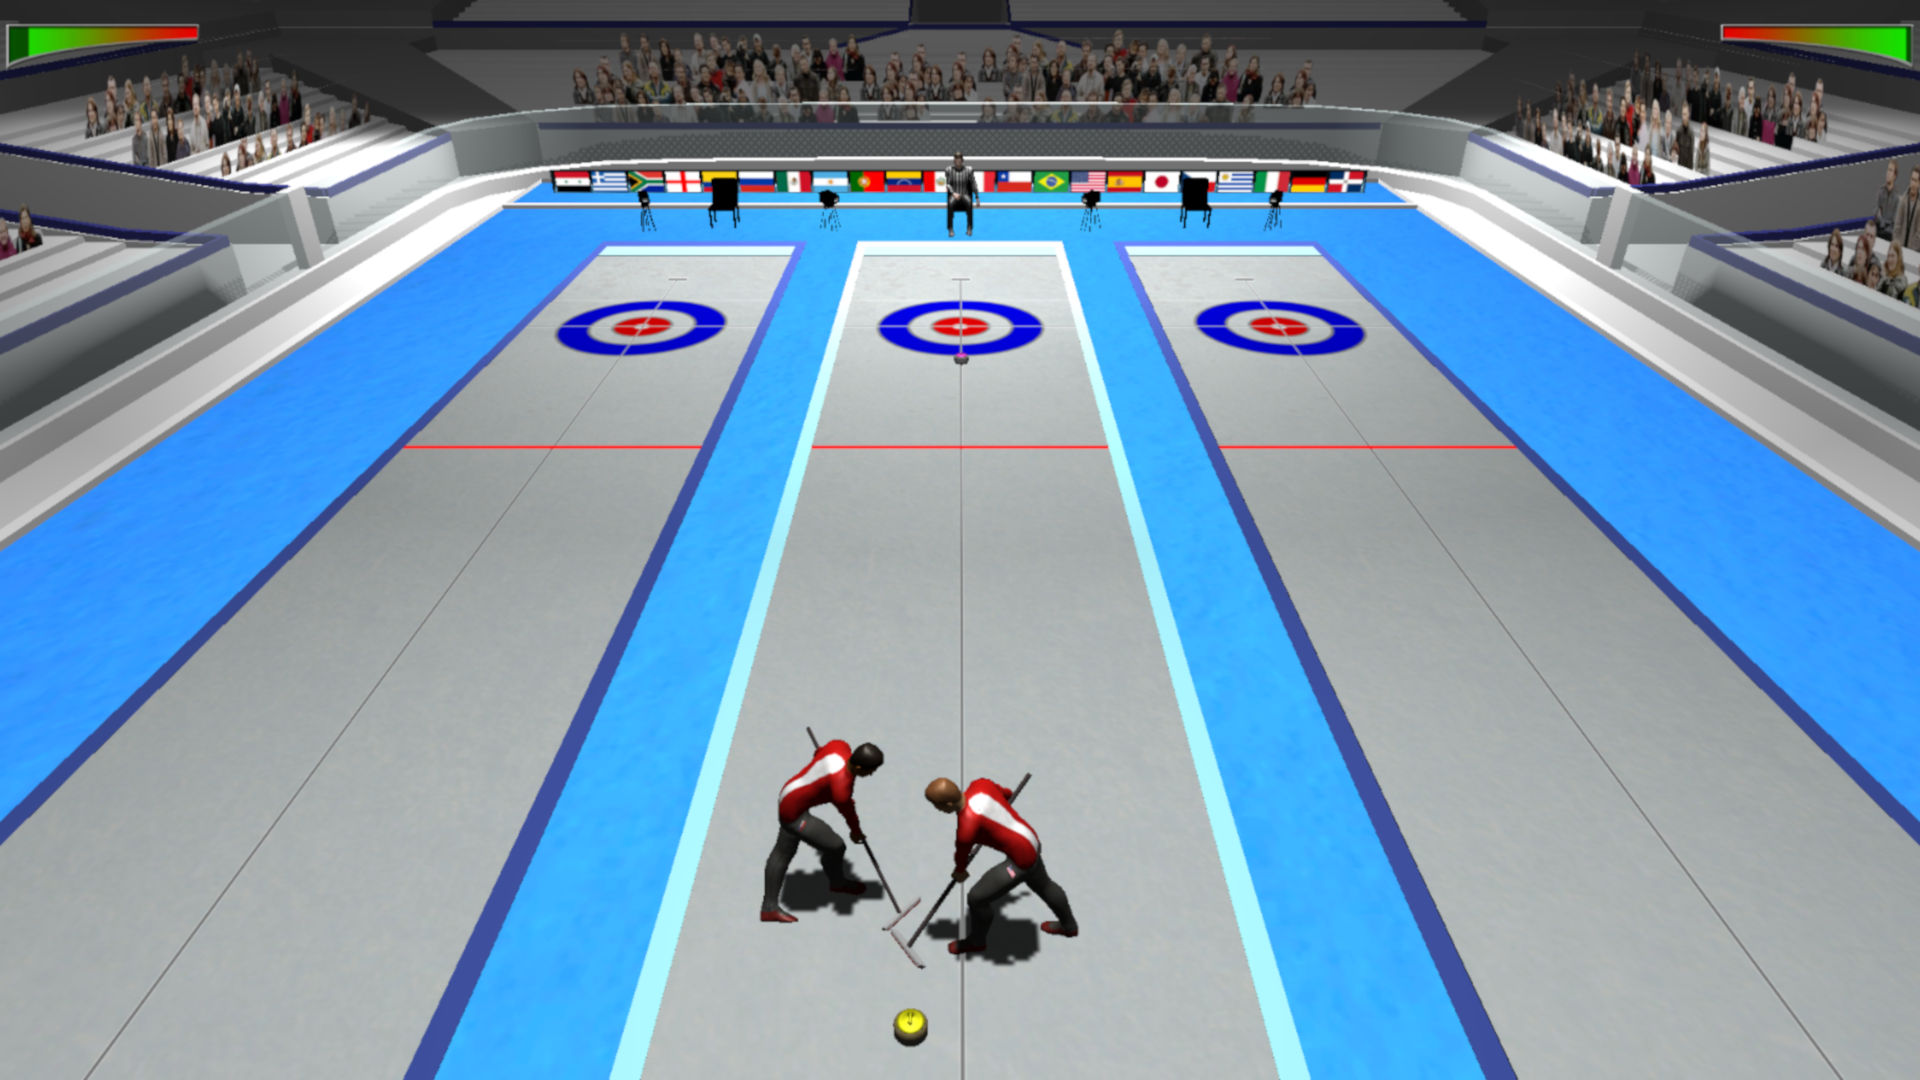 Curling On Line by Pix Arts